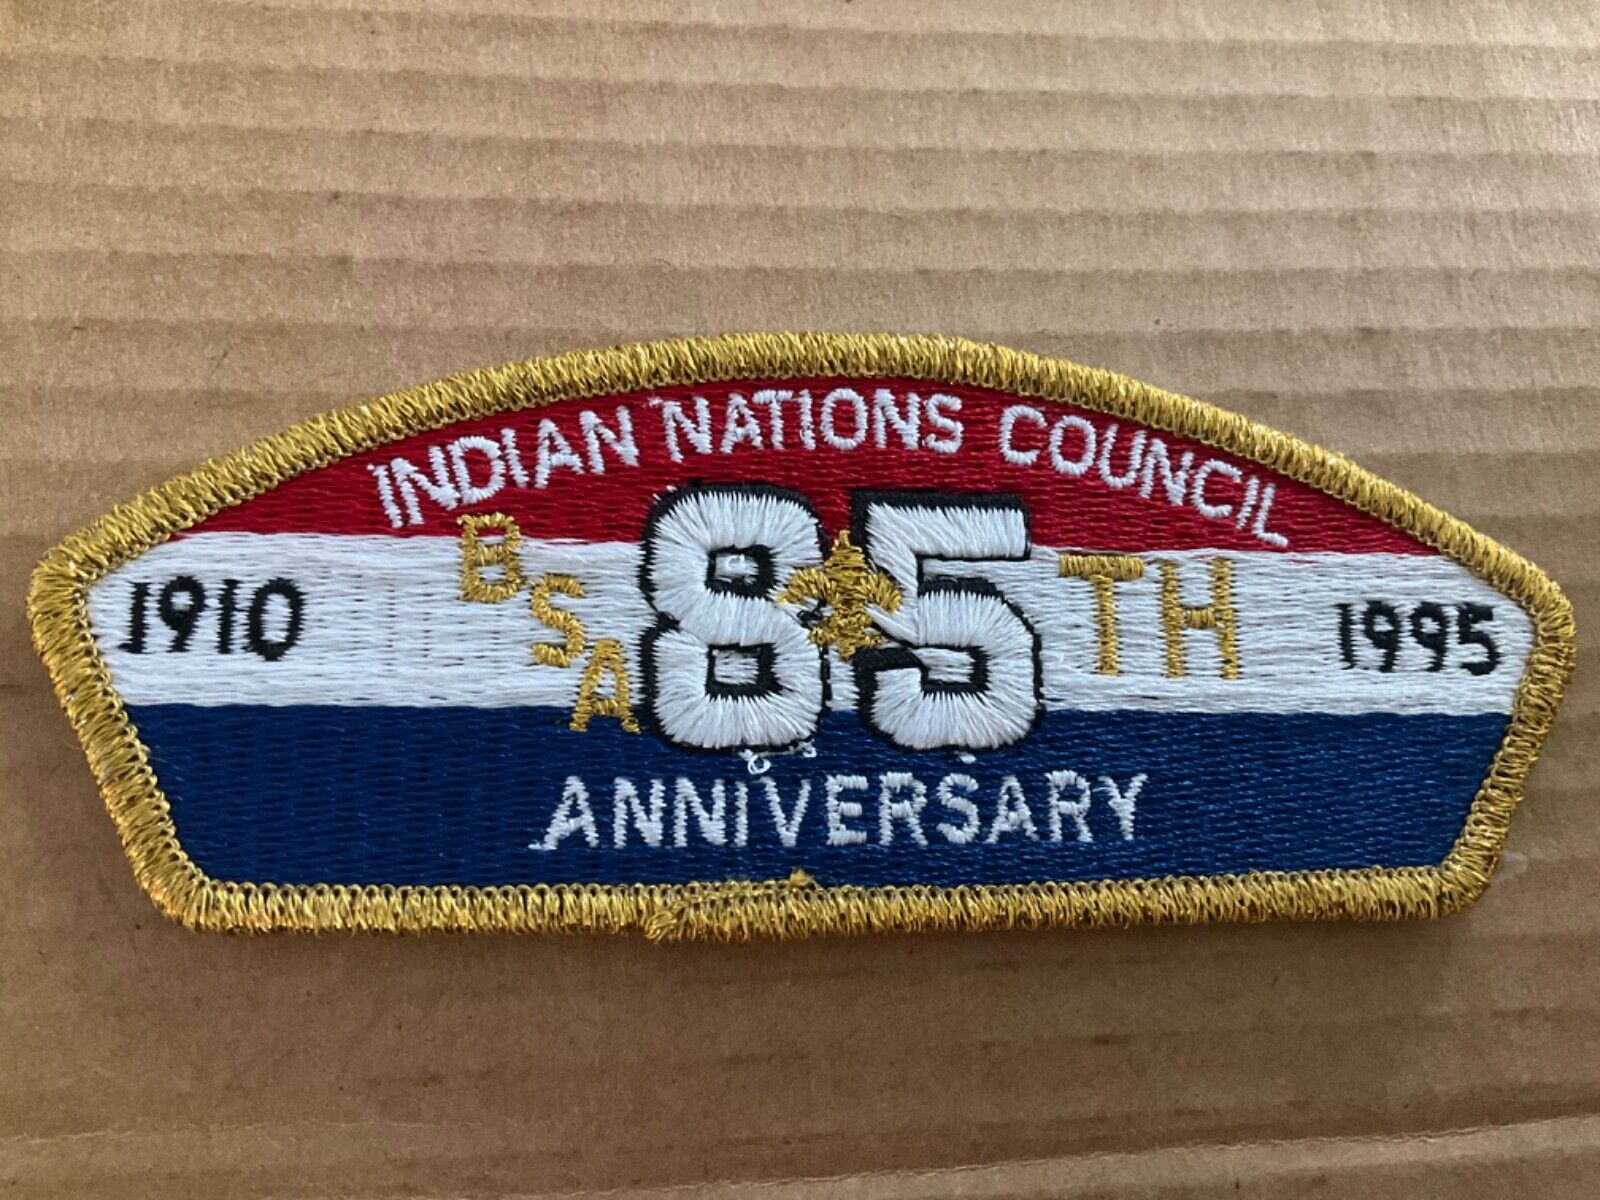 Indian Nations Council CSP SA-10 BSA 85th Anniversary 1995 older issue SALE